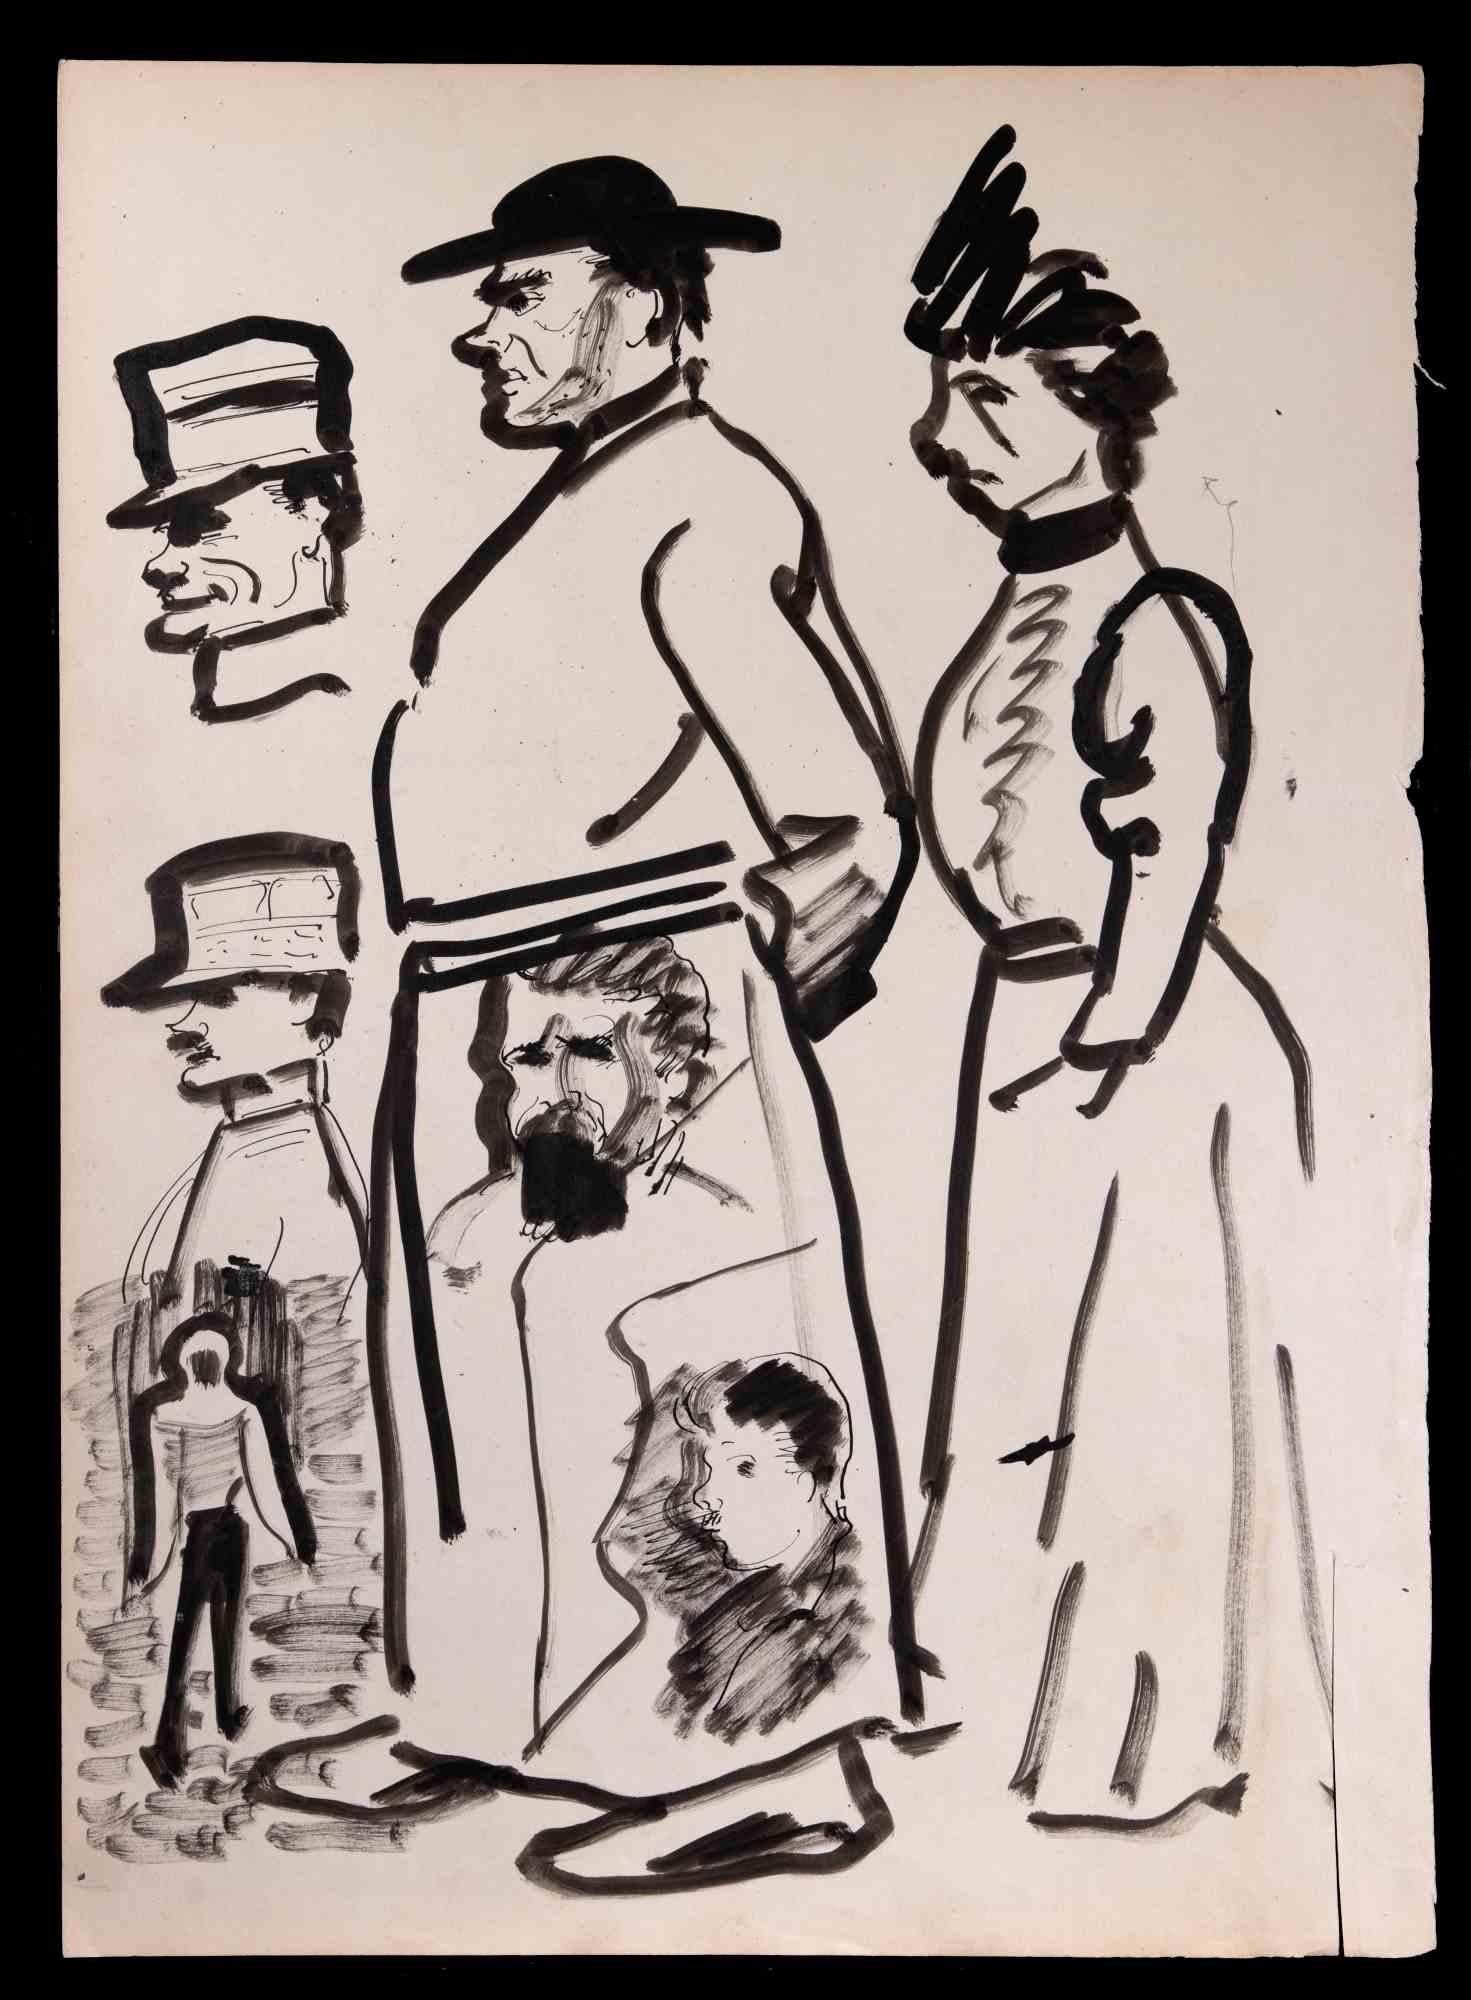 Unknown Figurative Art - Characters - Drawing in Black Marker - Early 20th Century